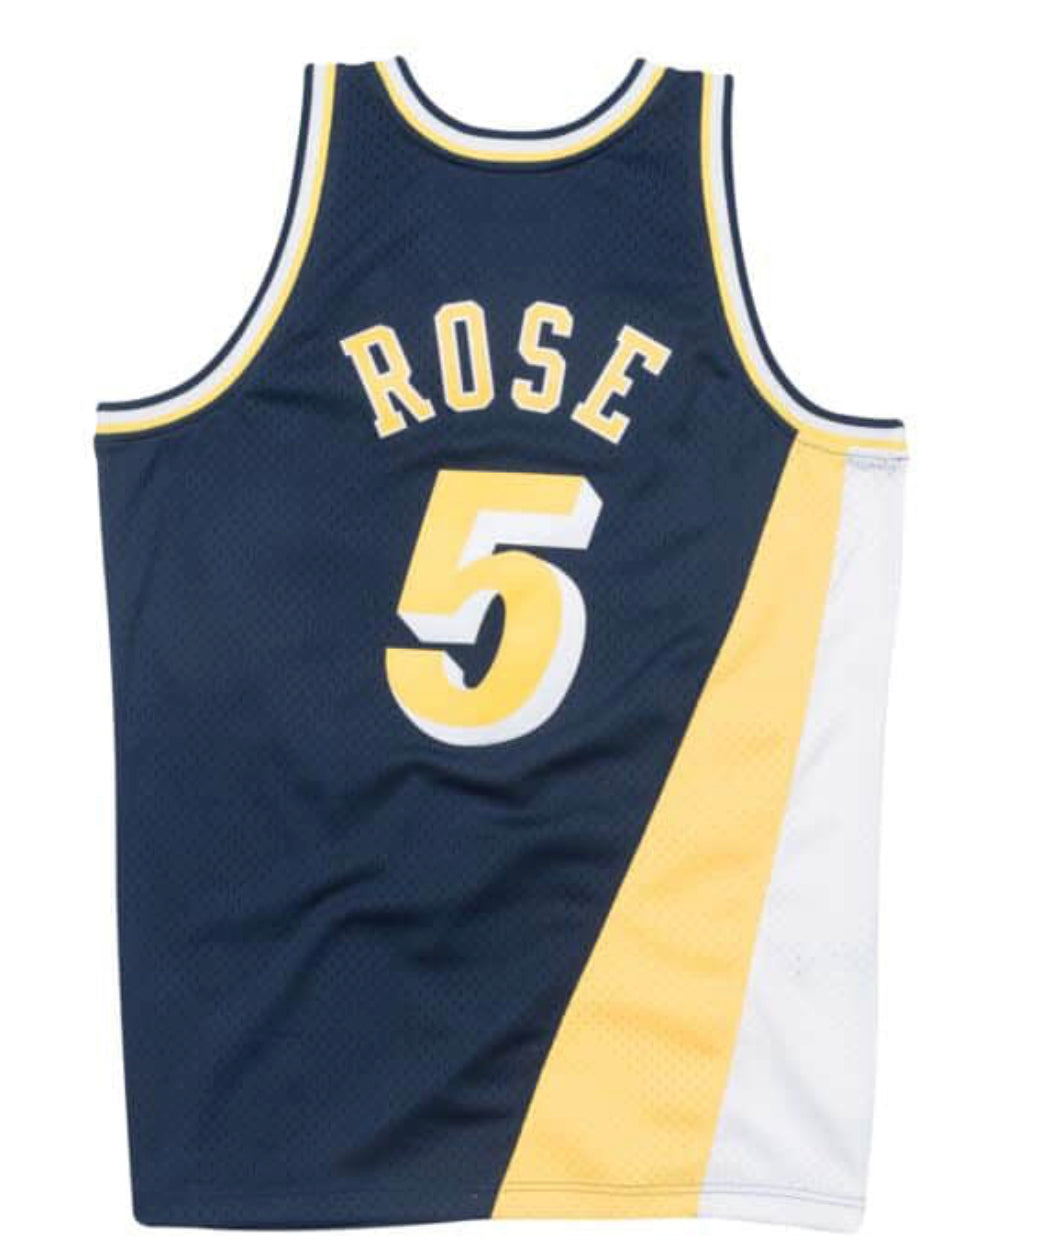 Indiana Pacers 1996-97 Jalen Rose Mitchell and Ness Swingman Jersey